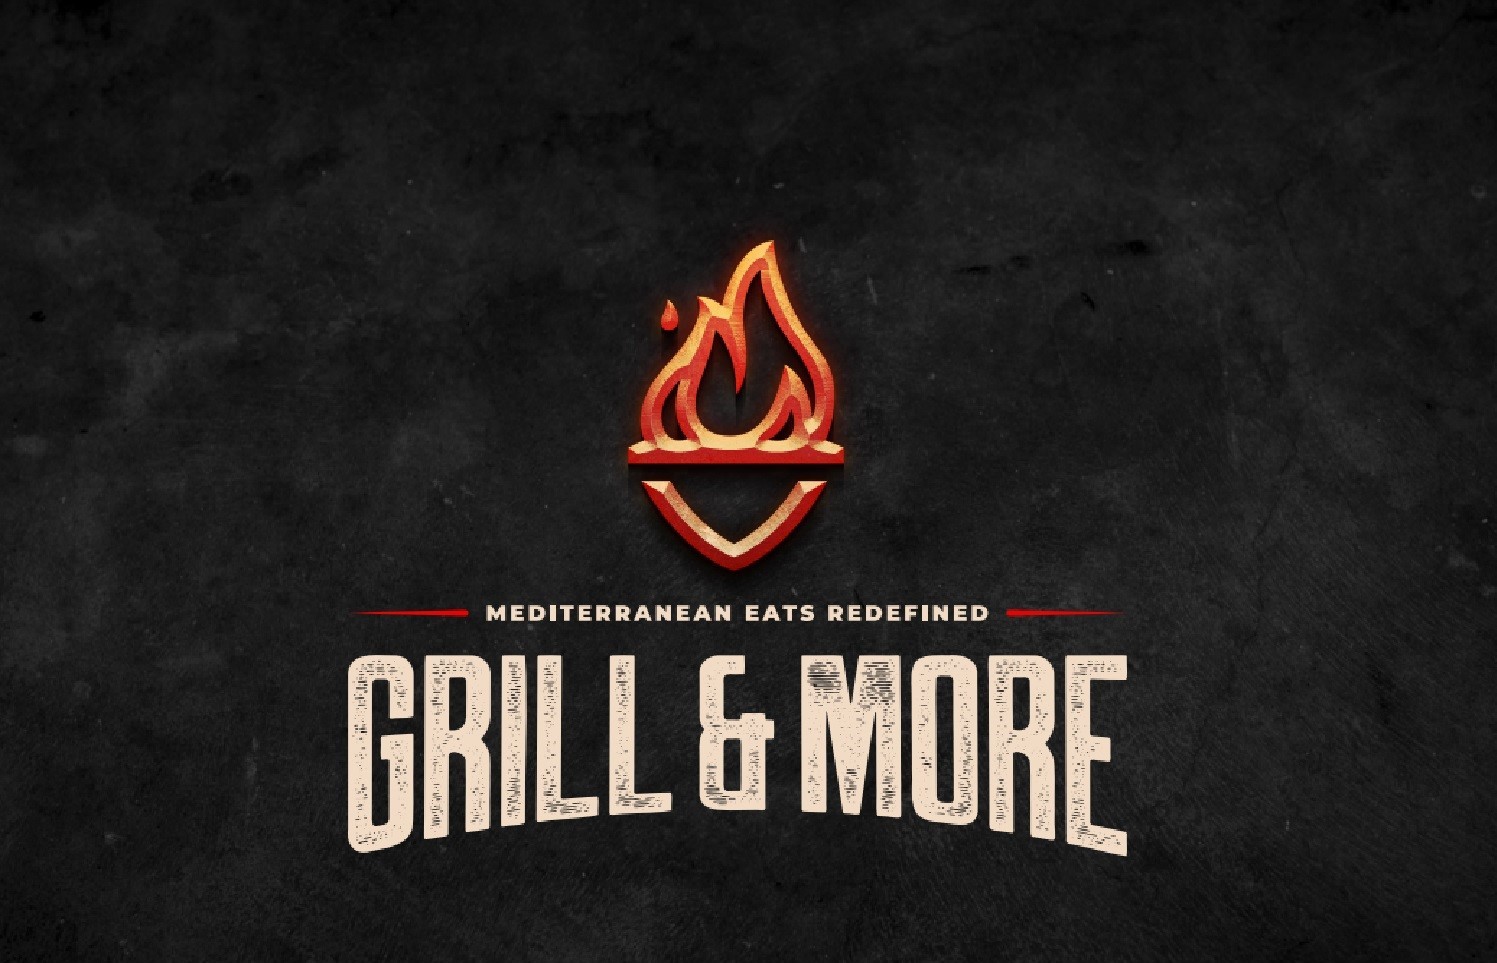 Grill and More